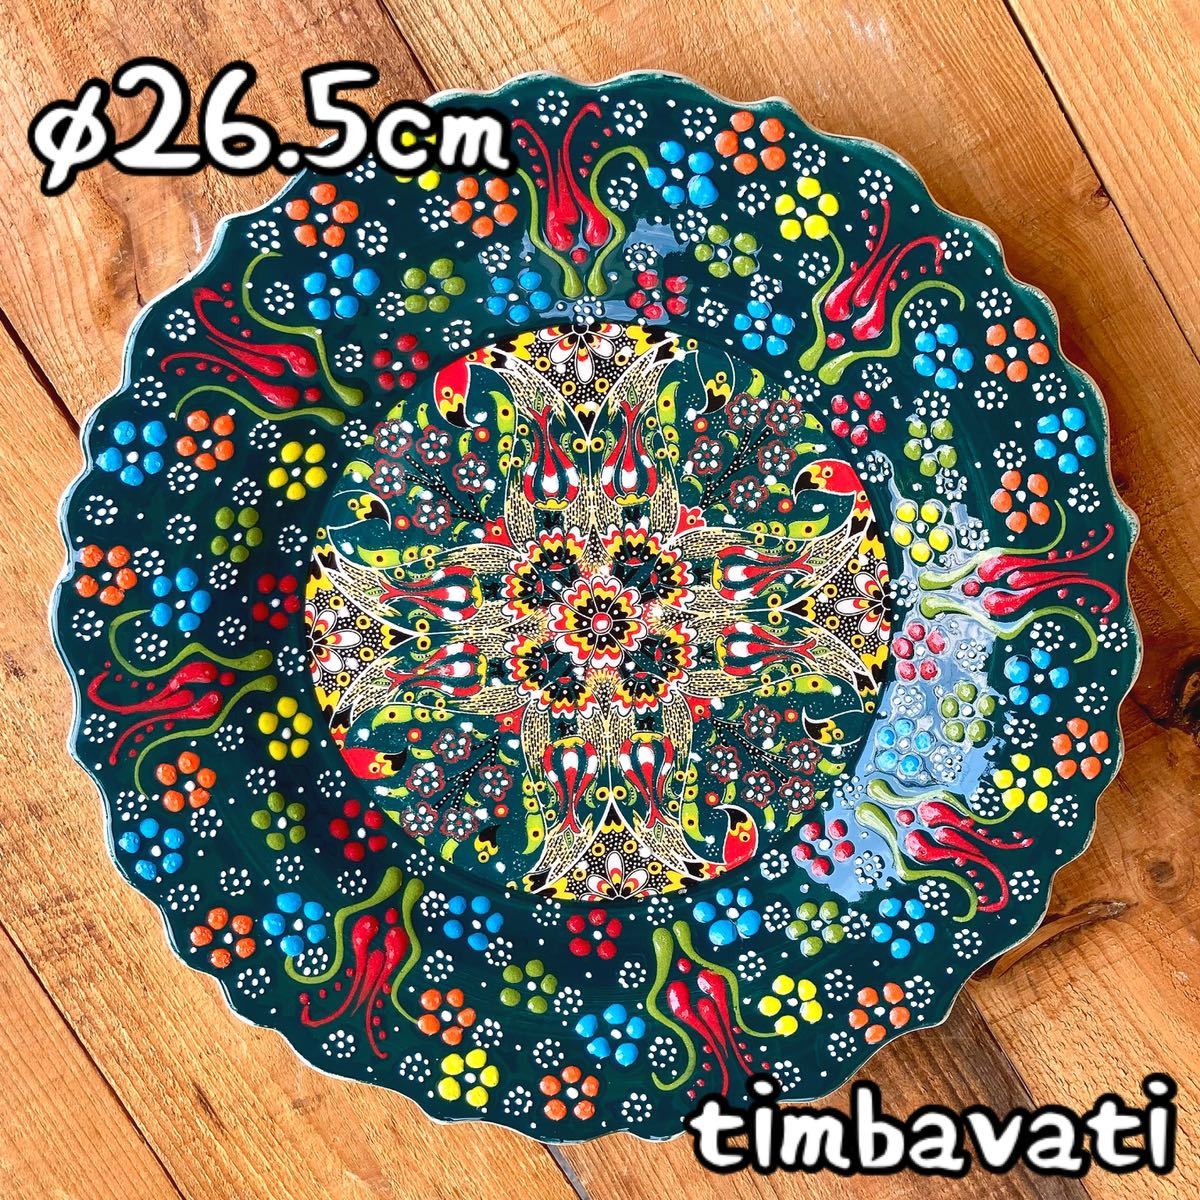 26.5cm☆Brand new☆Turkish pottery plate wall hanging interior decoration*dark green*Handmade Kutahya pottery【Free shipping under certain conditions】099, Western-style tableware, plate, dish, others